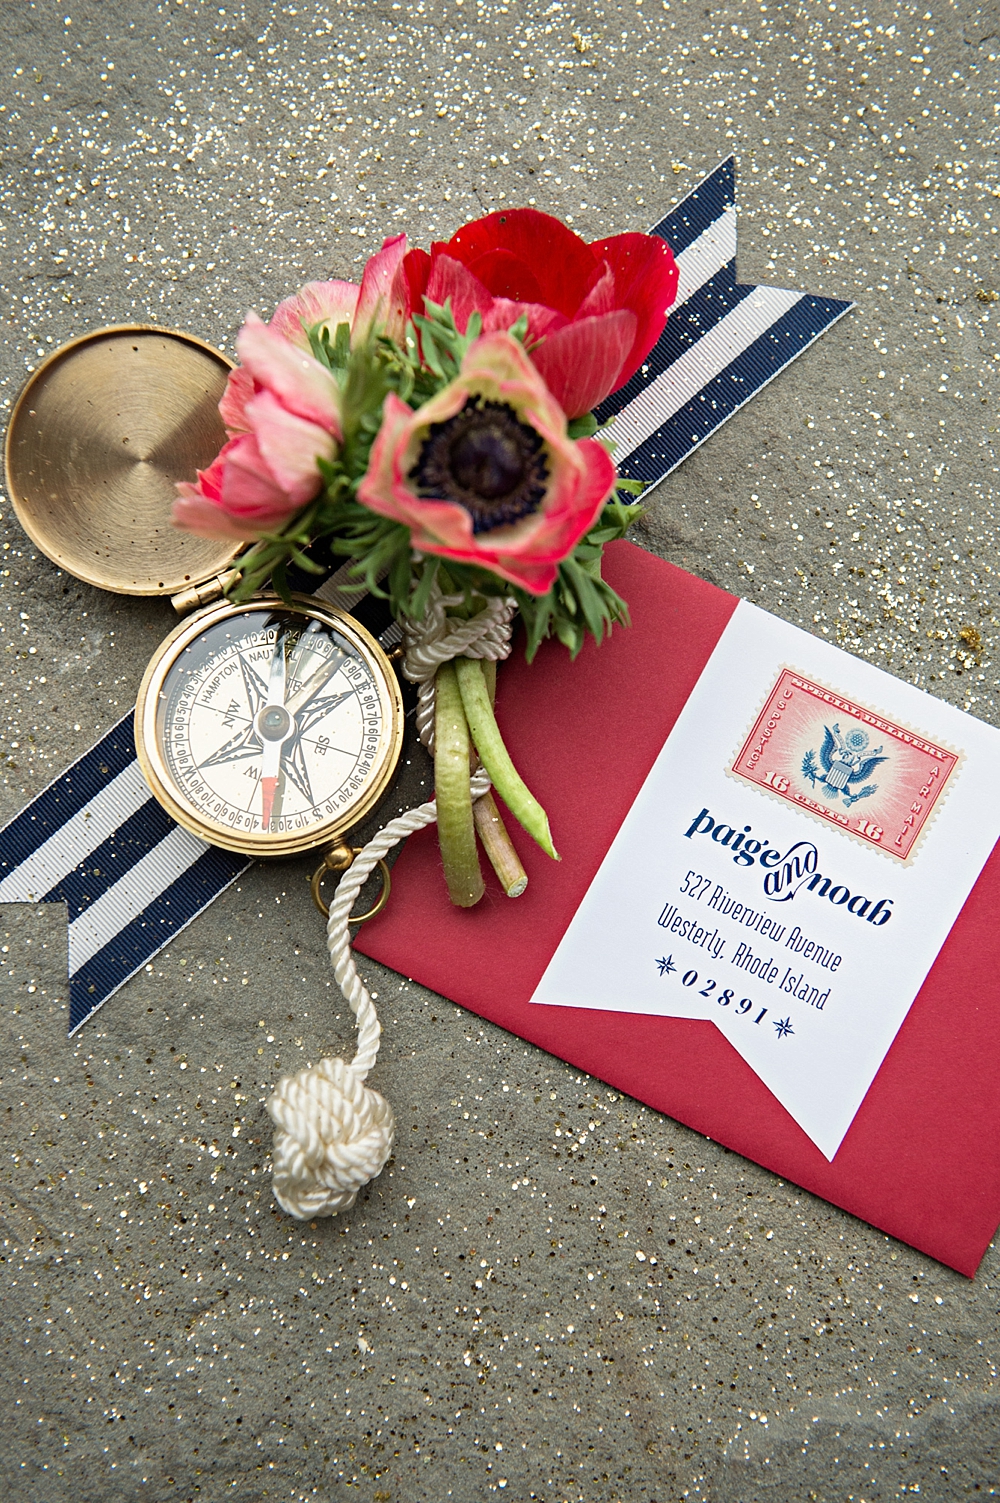 Nautical & Preppy wedding invitation suite in navy blue, red and yellow